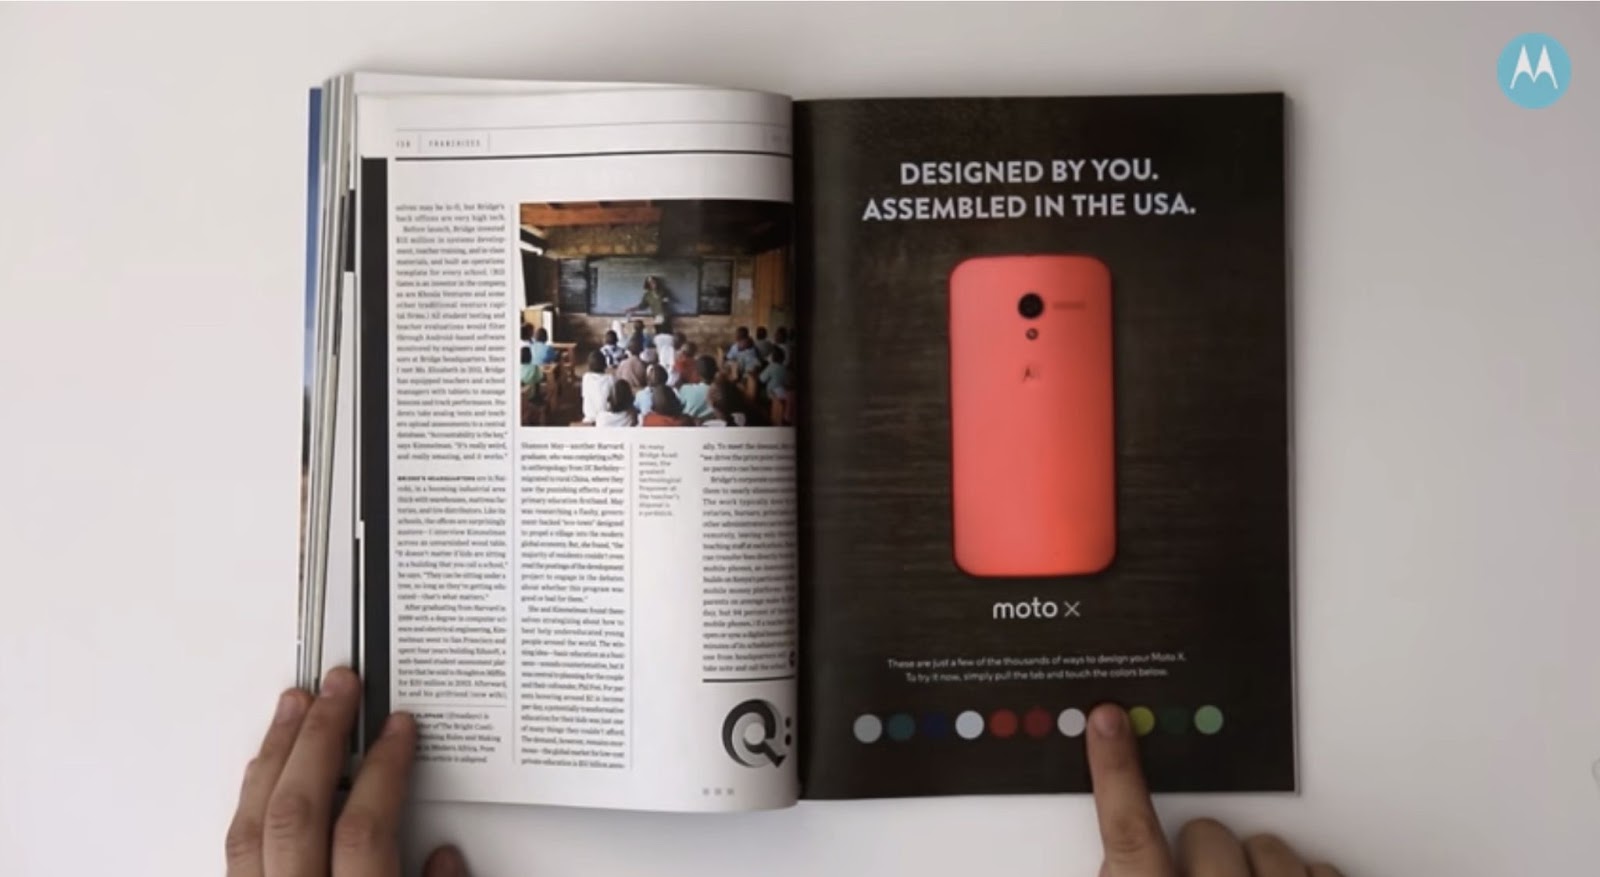 A MotoX magazine ad as part of a brand awareness campaign by Motorola.